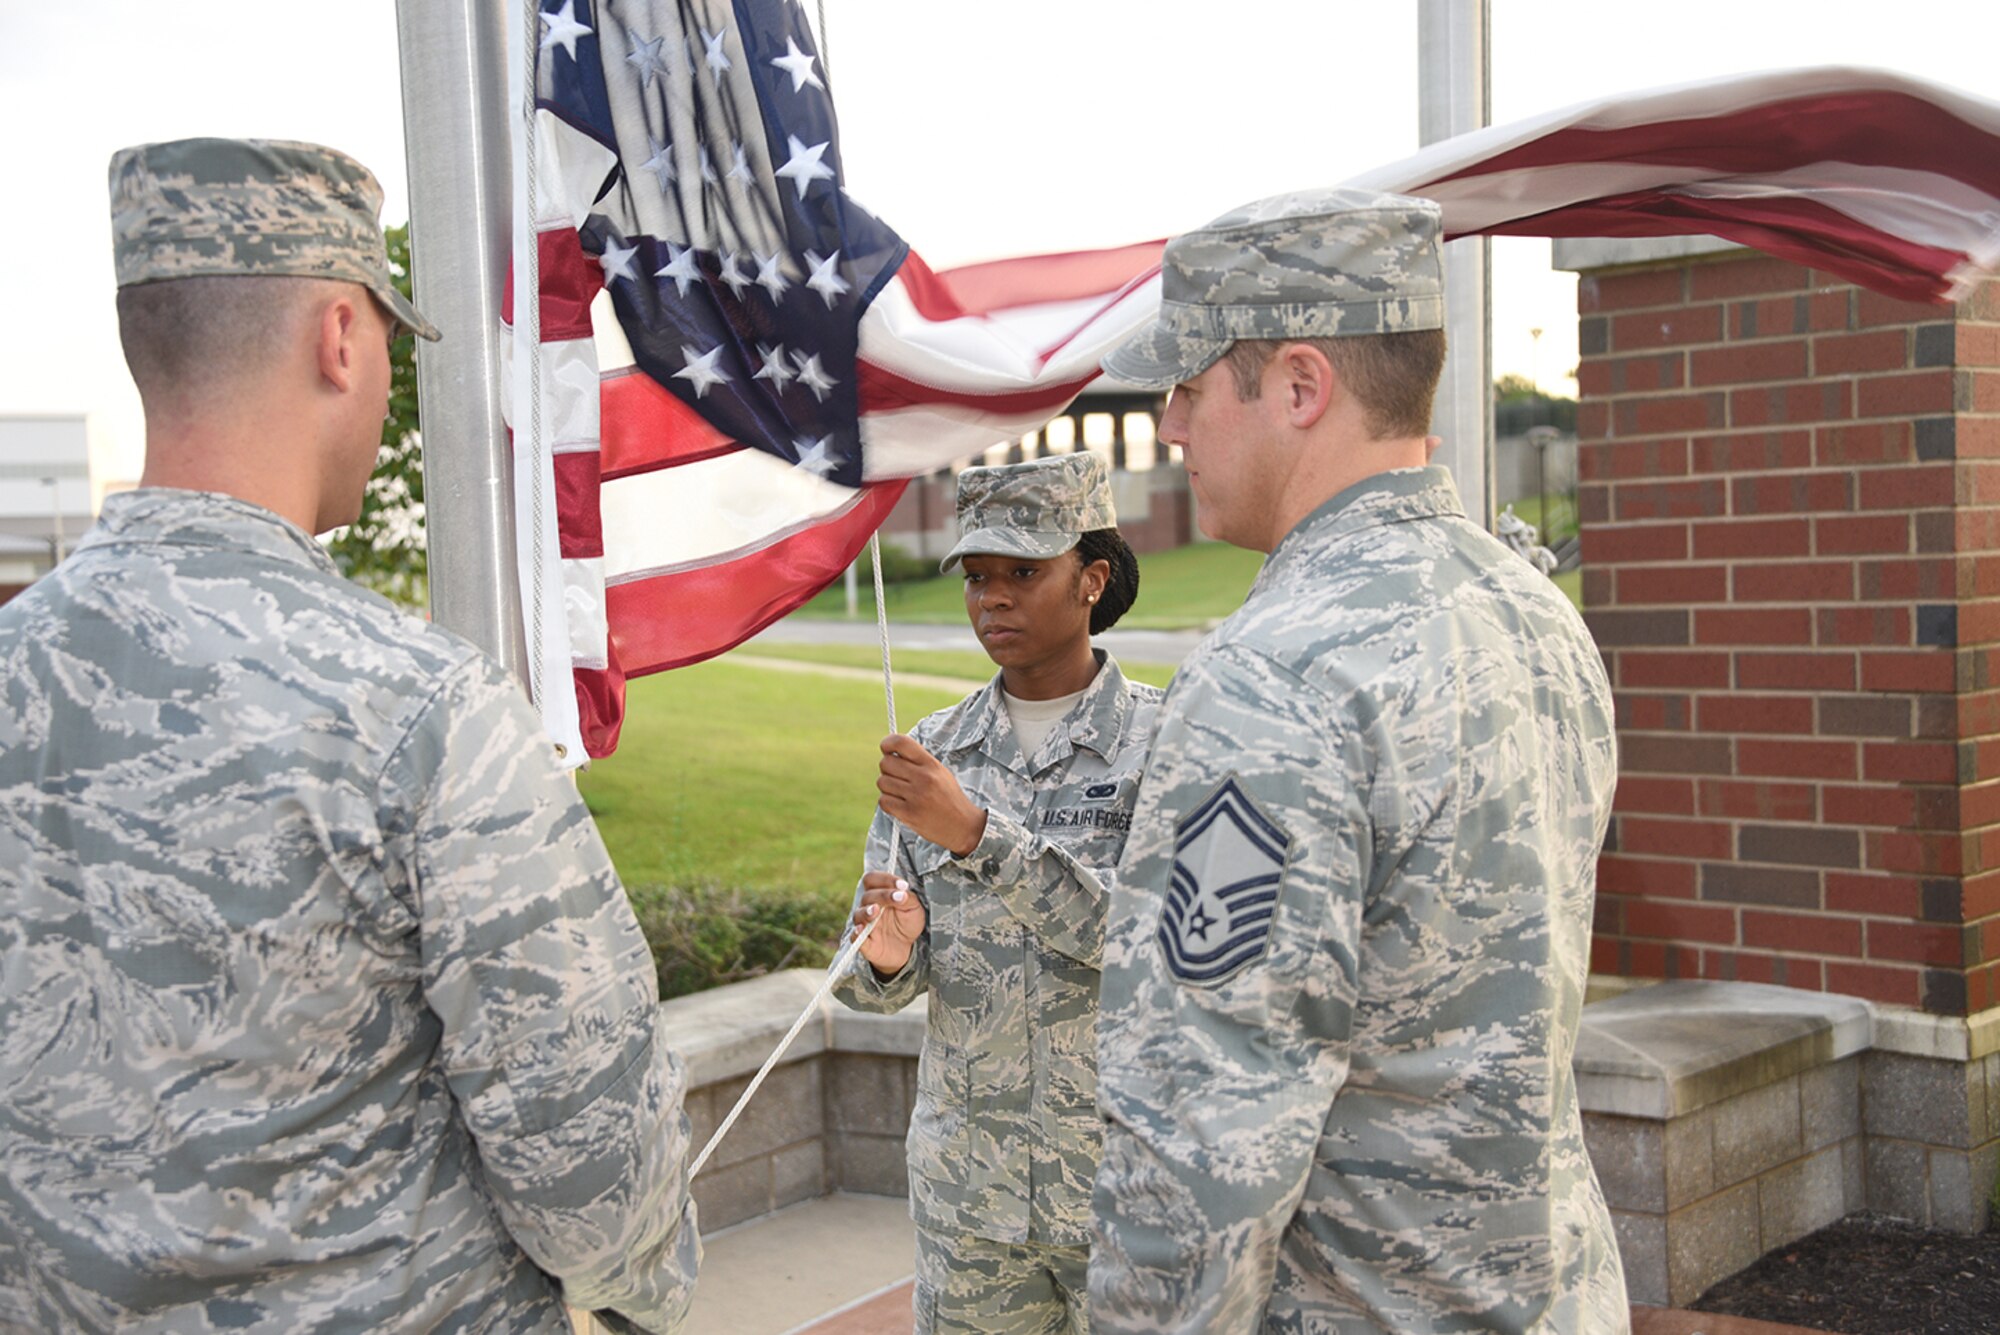 Senior Airman Chelcee Arnold lowers the flag With Lieutenant Matthew Begin and Senior Master Sergeant Matthew Smith during the Retreat Ceremony at Memphis Air National Guard Base on August 7, 2016. (U.S. Air National Guard photo by Master Sergeant Danial Mosher/Released)